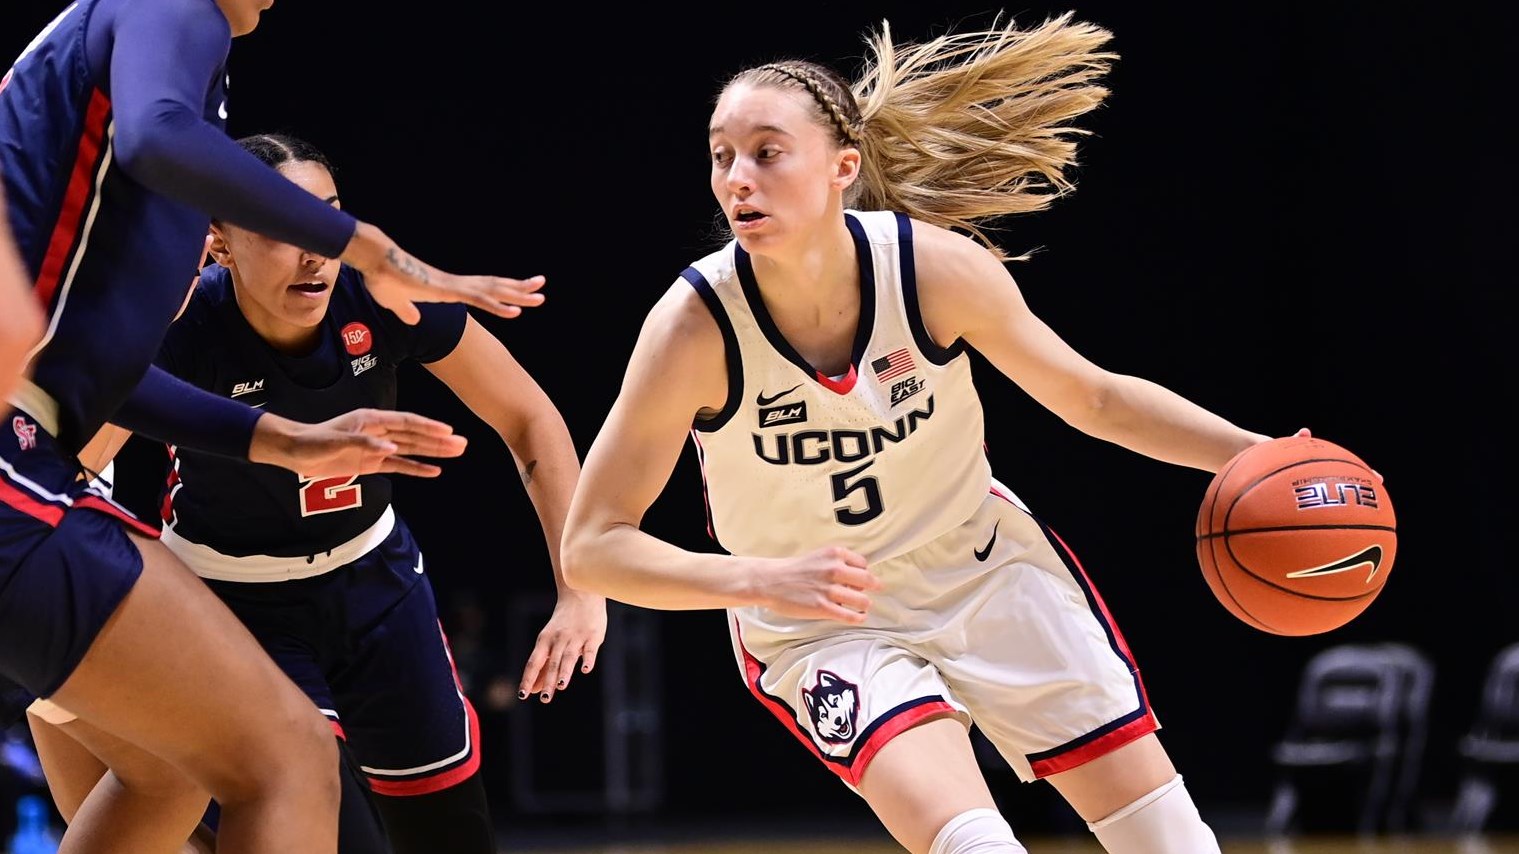 How To Watch Uconn Women’s Basketball Game Today